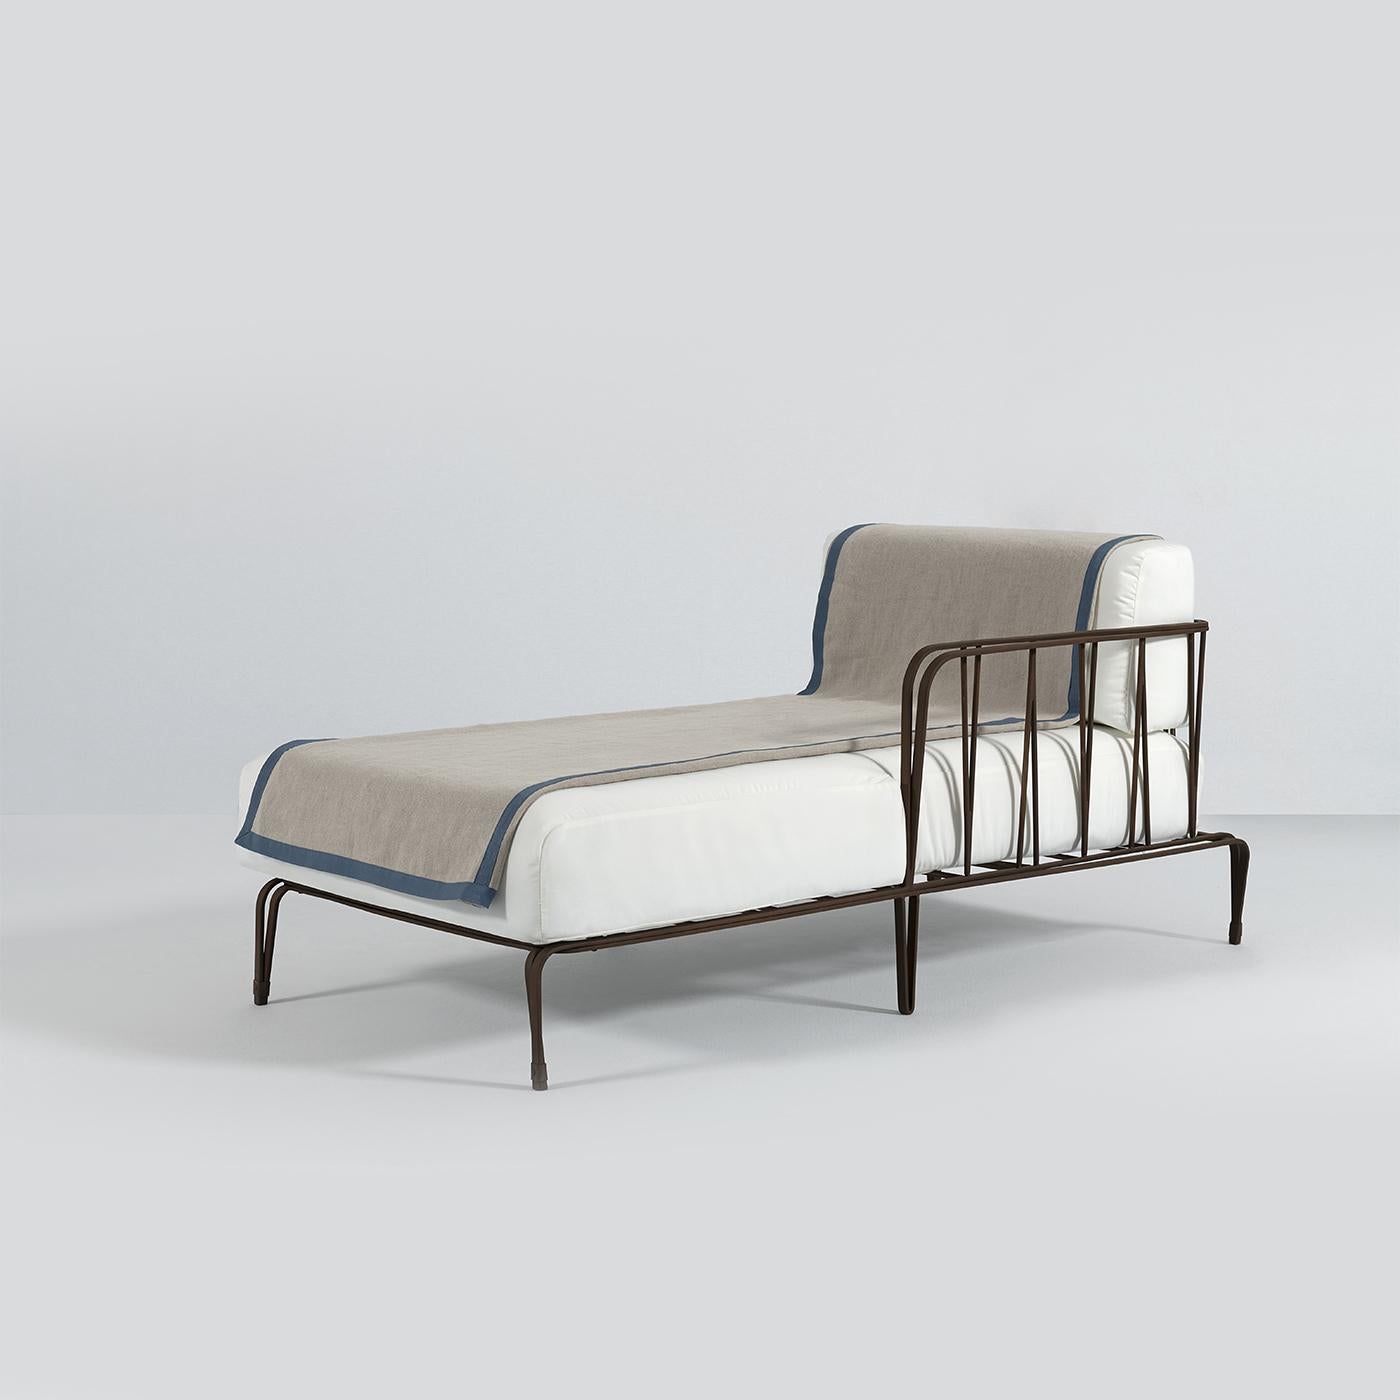 The Marina chaise longue fuses old with new, boasting a traditional Florentine brown stainless steel frame with a galvanized powder-coated finish. Its timeless allure is accentuated through its sleek white design, upholstered in outdoor fabric for